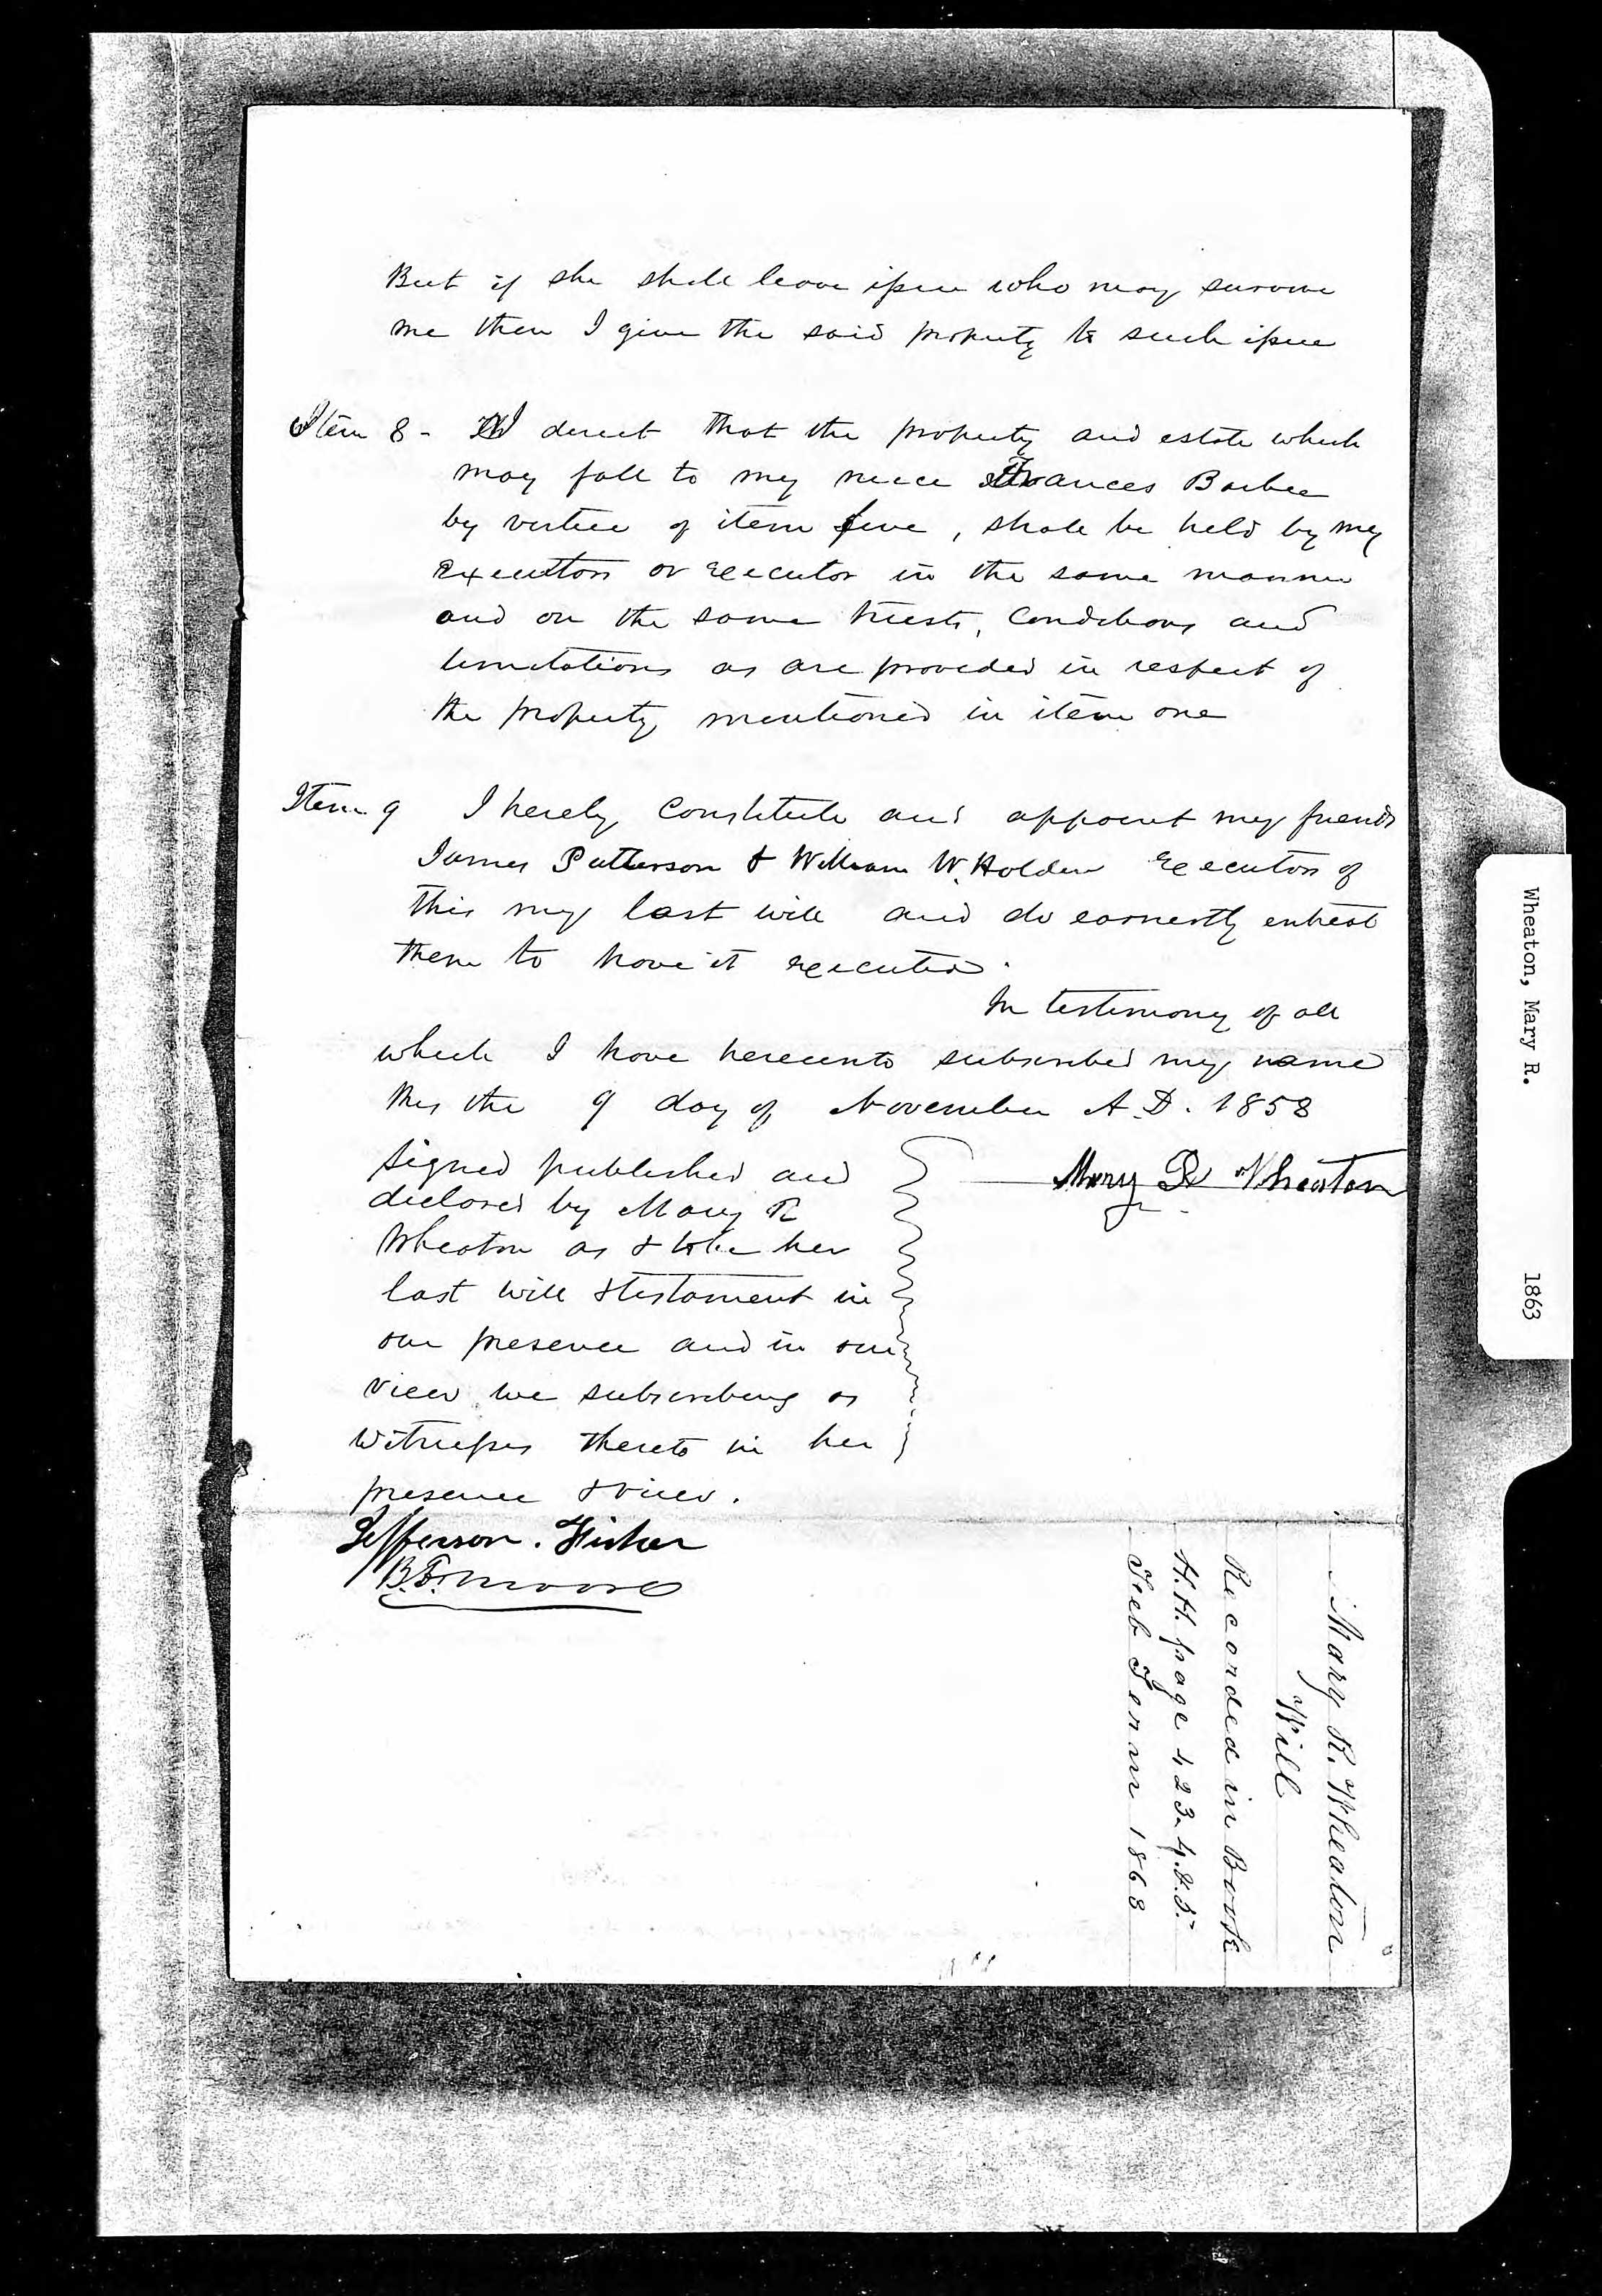 Will of Mary R. Wheaton, November 9, 1858, page 4